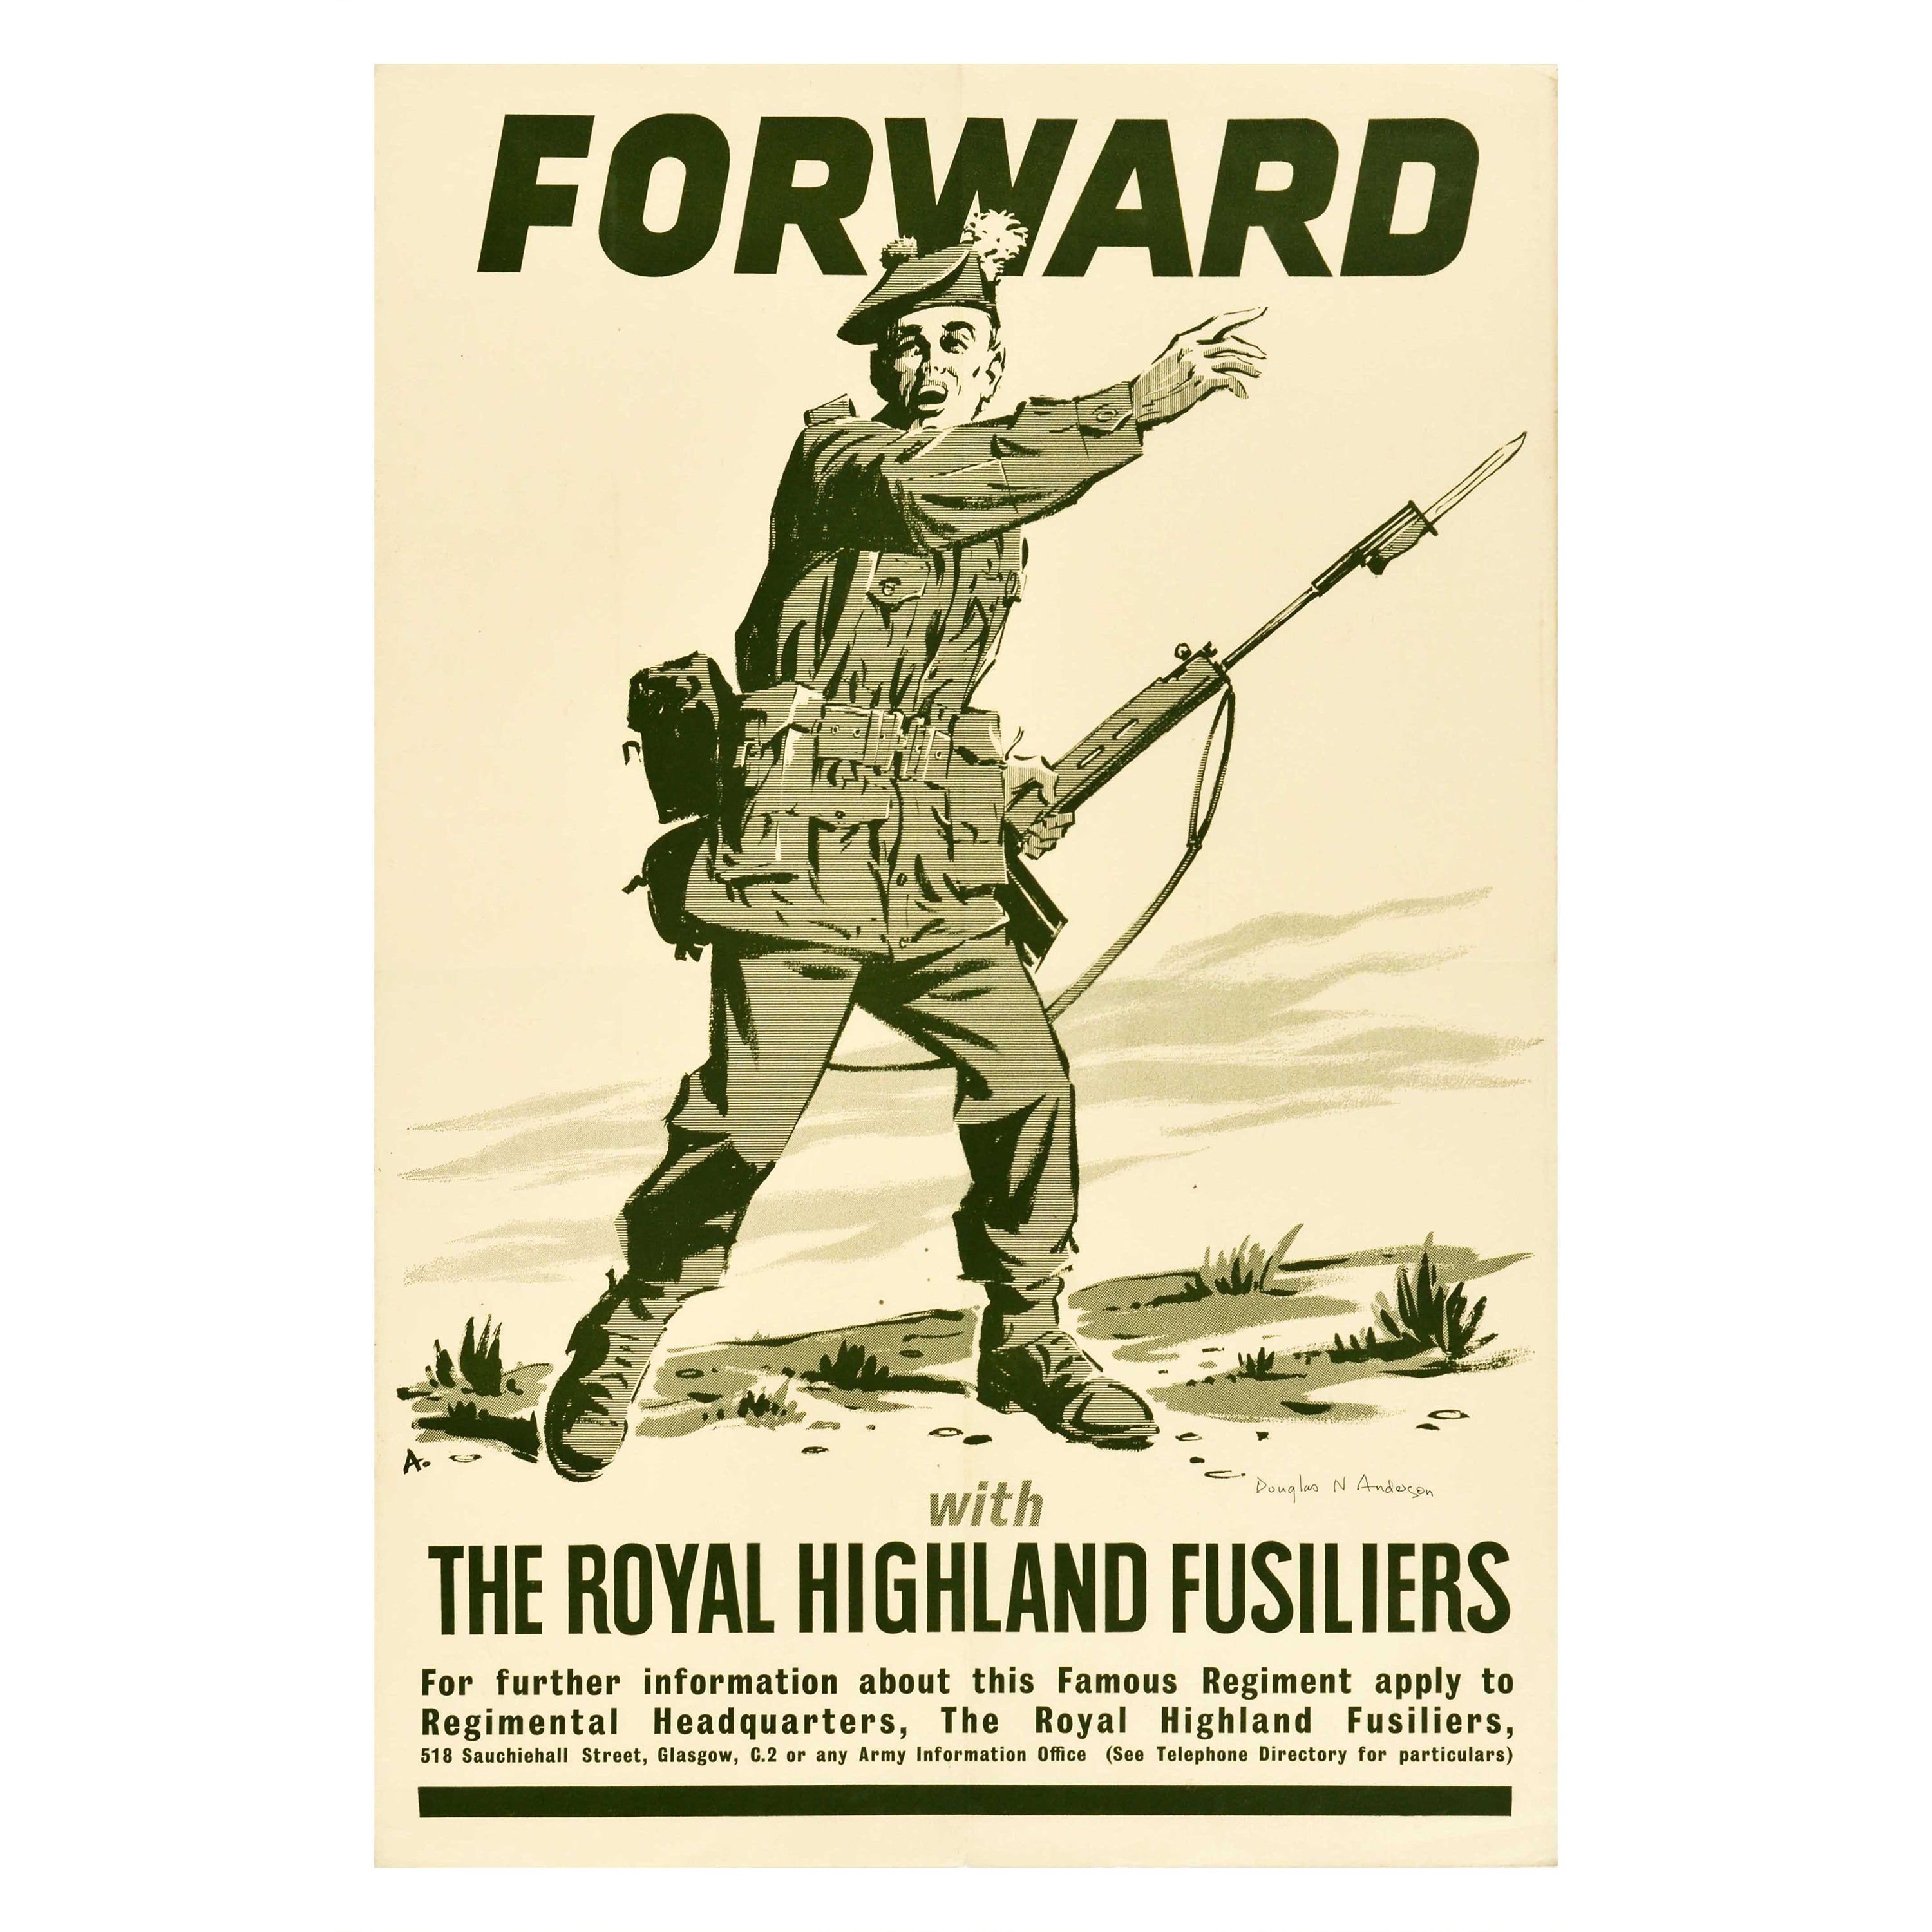 Original Vintage Military Poster Forward The Royal Highland Fusiliers Regiment For Sale